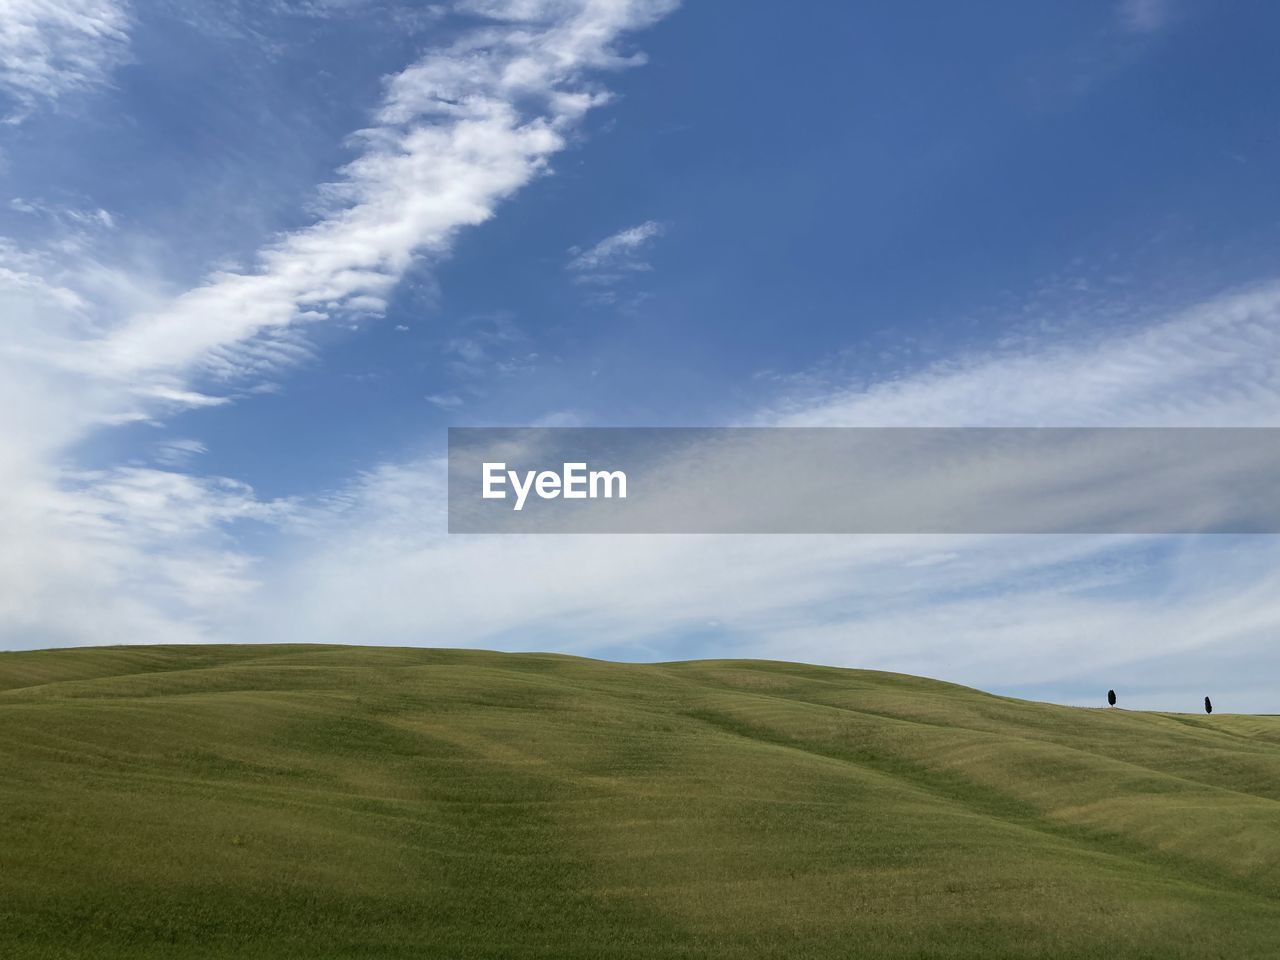 sky, grassland, horizon, environment, landscape, plain, grass, cloud, hill, field, land, scenics - nature, nature, beauty in nature, prairie, plant, green, meadow, blue, plateau, steppe, tranquility, non-urban scene, horizon over land, tranquil scene, pasture, rural scene, day, leisure activity, golf, outdoors, activity, no people, golf course, sports, rural area, sunlight, natural environment, cloudscape, travel, summer, idyllic, travel destinations, rolling landscape, copy space